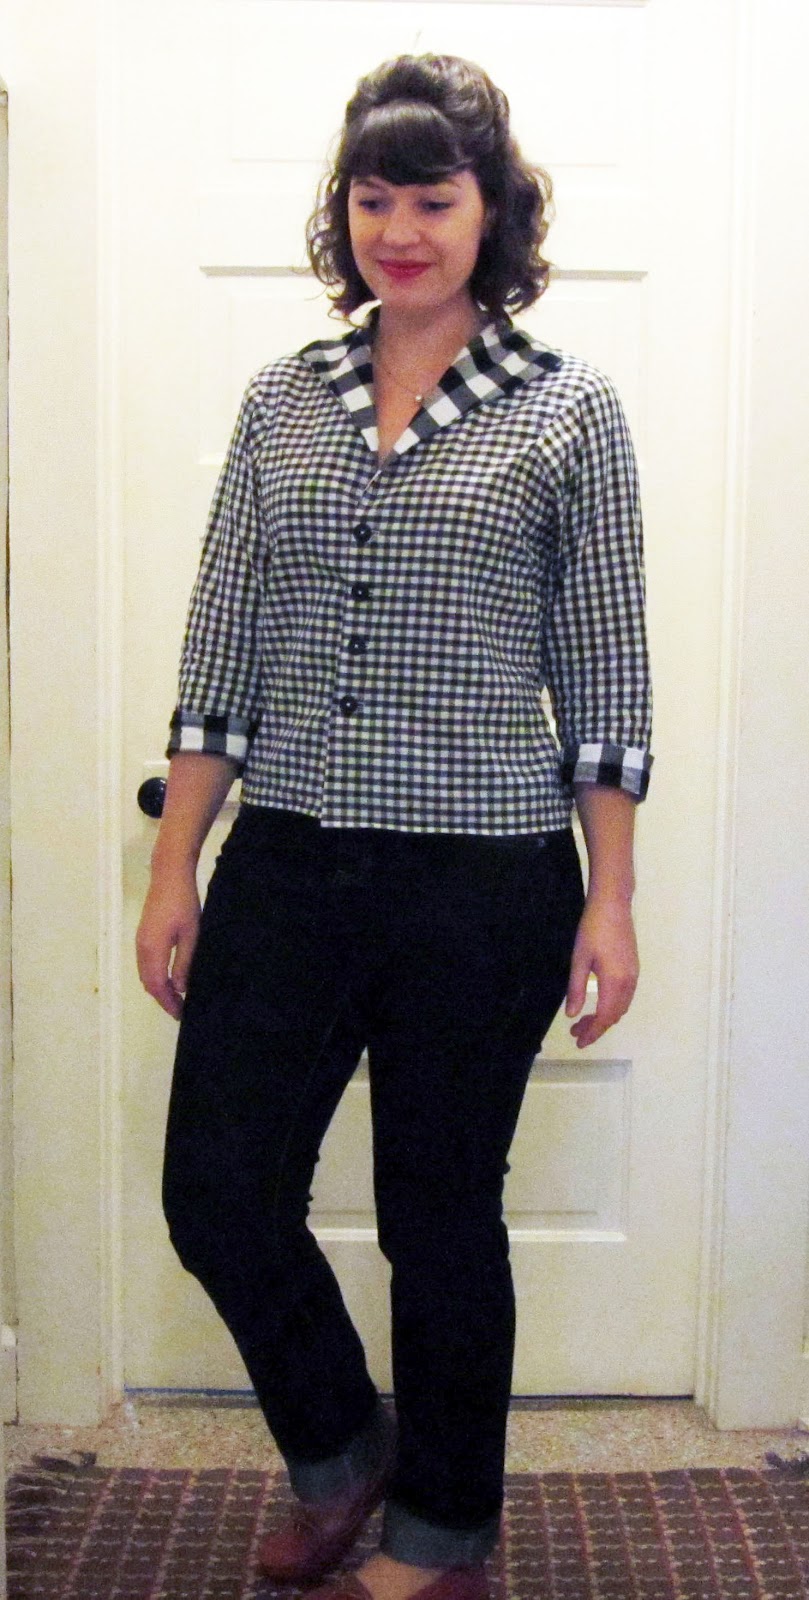 Errant Pear: Finished gingham blouse